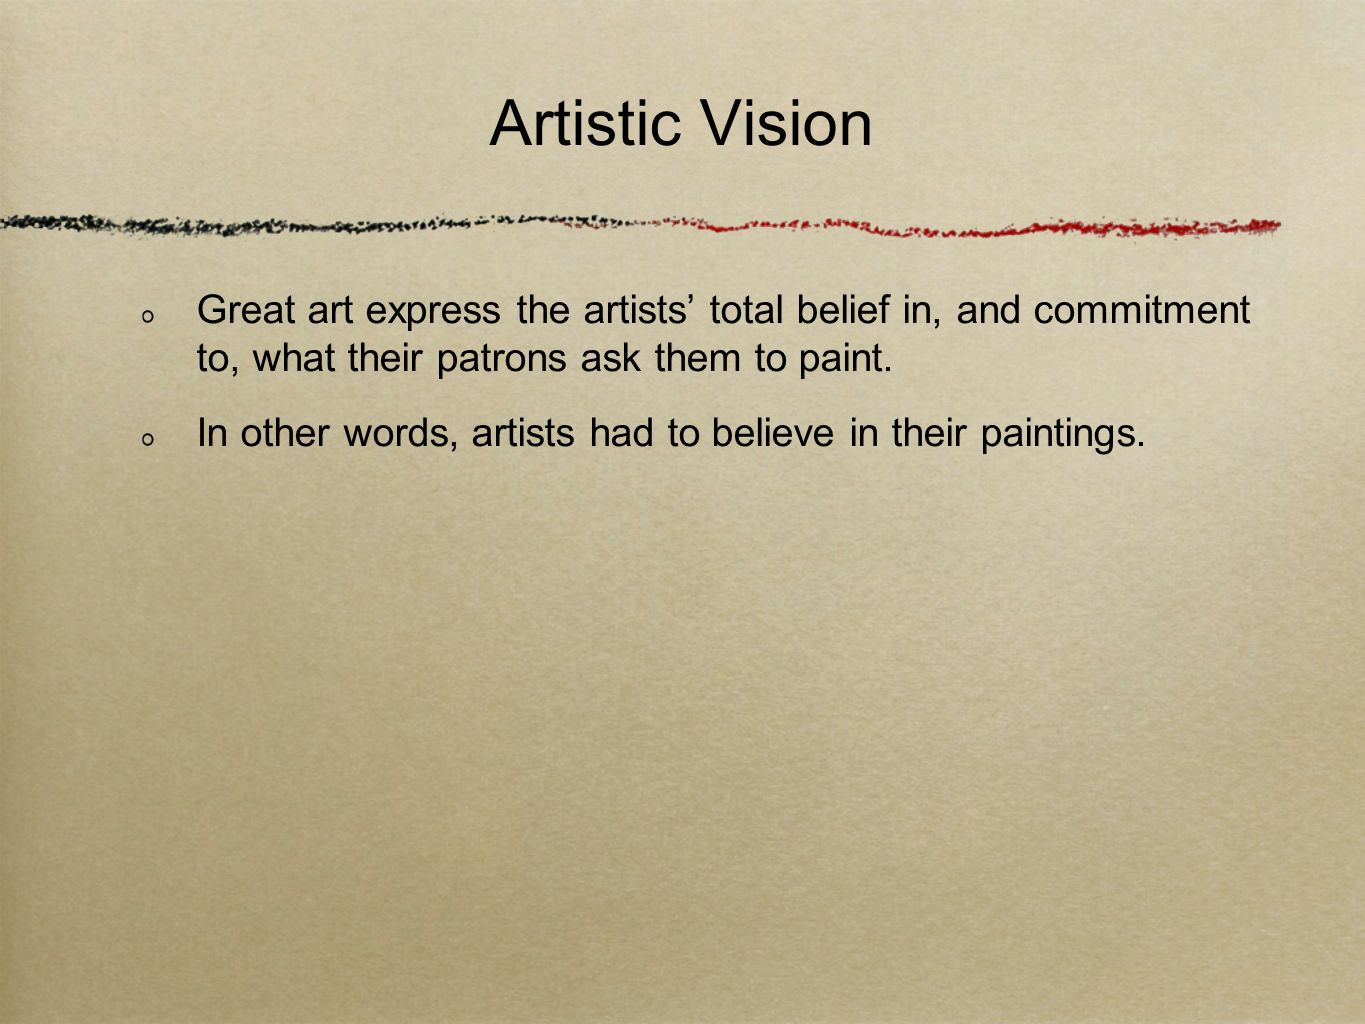 Artistic Vision Great art express the artists’ total belief in, and commitment to, what their patrons ask them to paint.